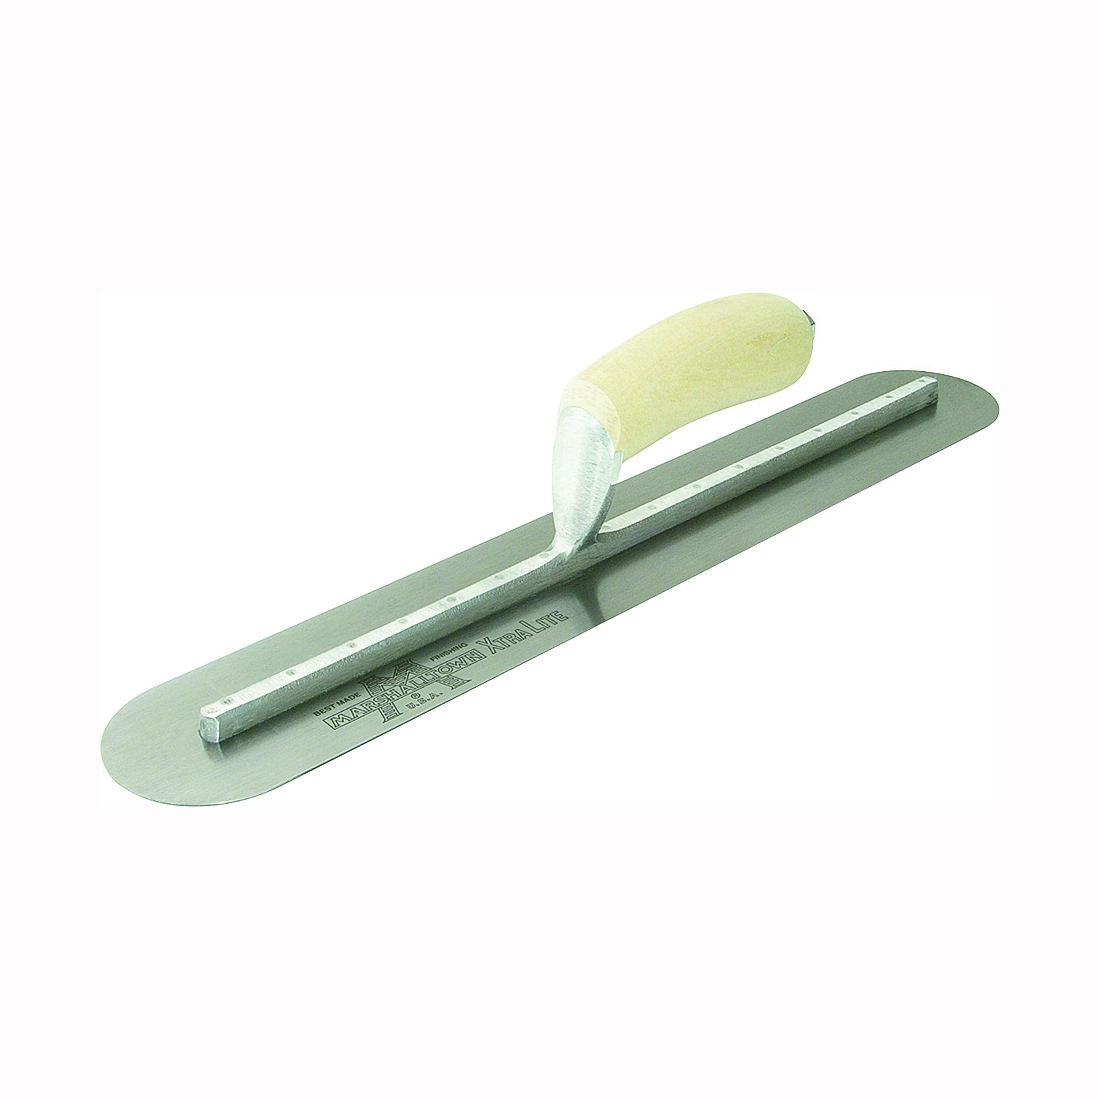 MXS20FR Finishing Trowel, 20 in L Blade, 4 in W Blade, Spring Steel Blade, Round End, Curved Handle